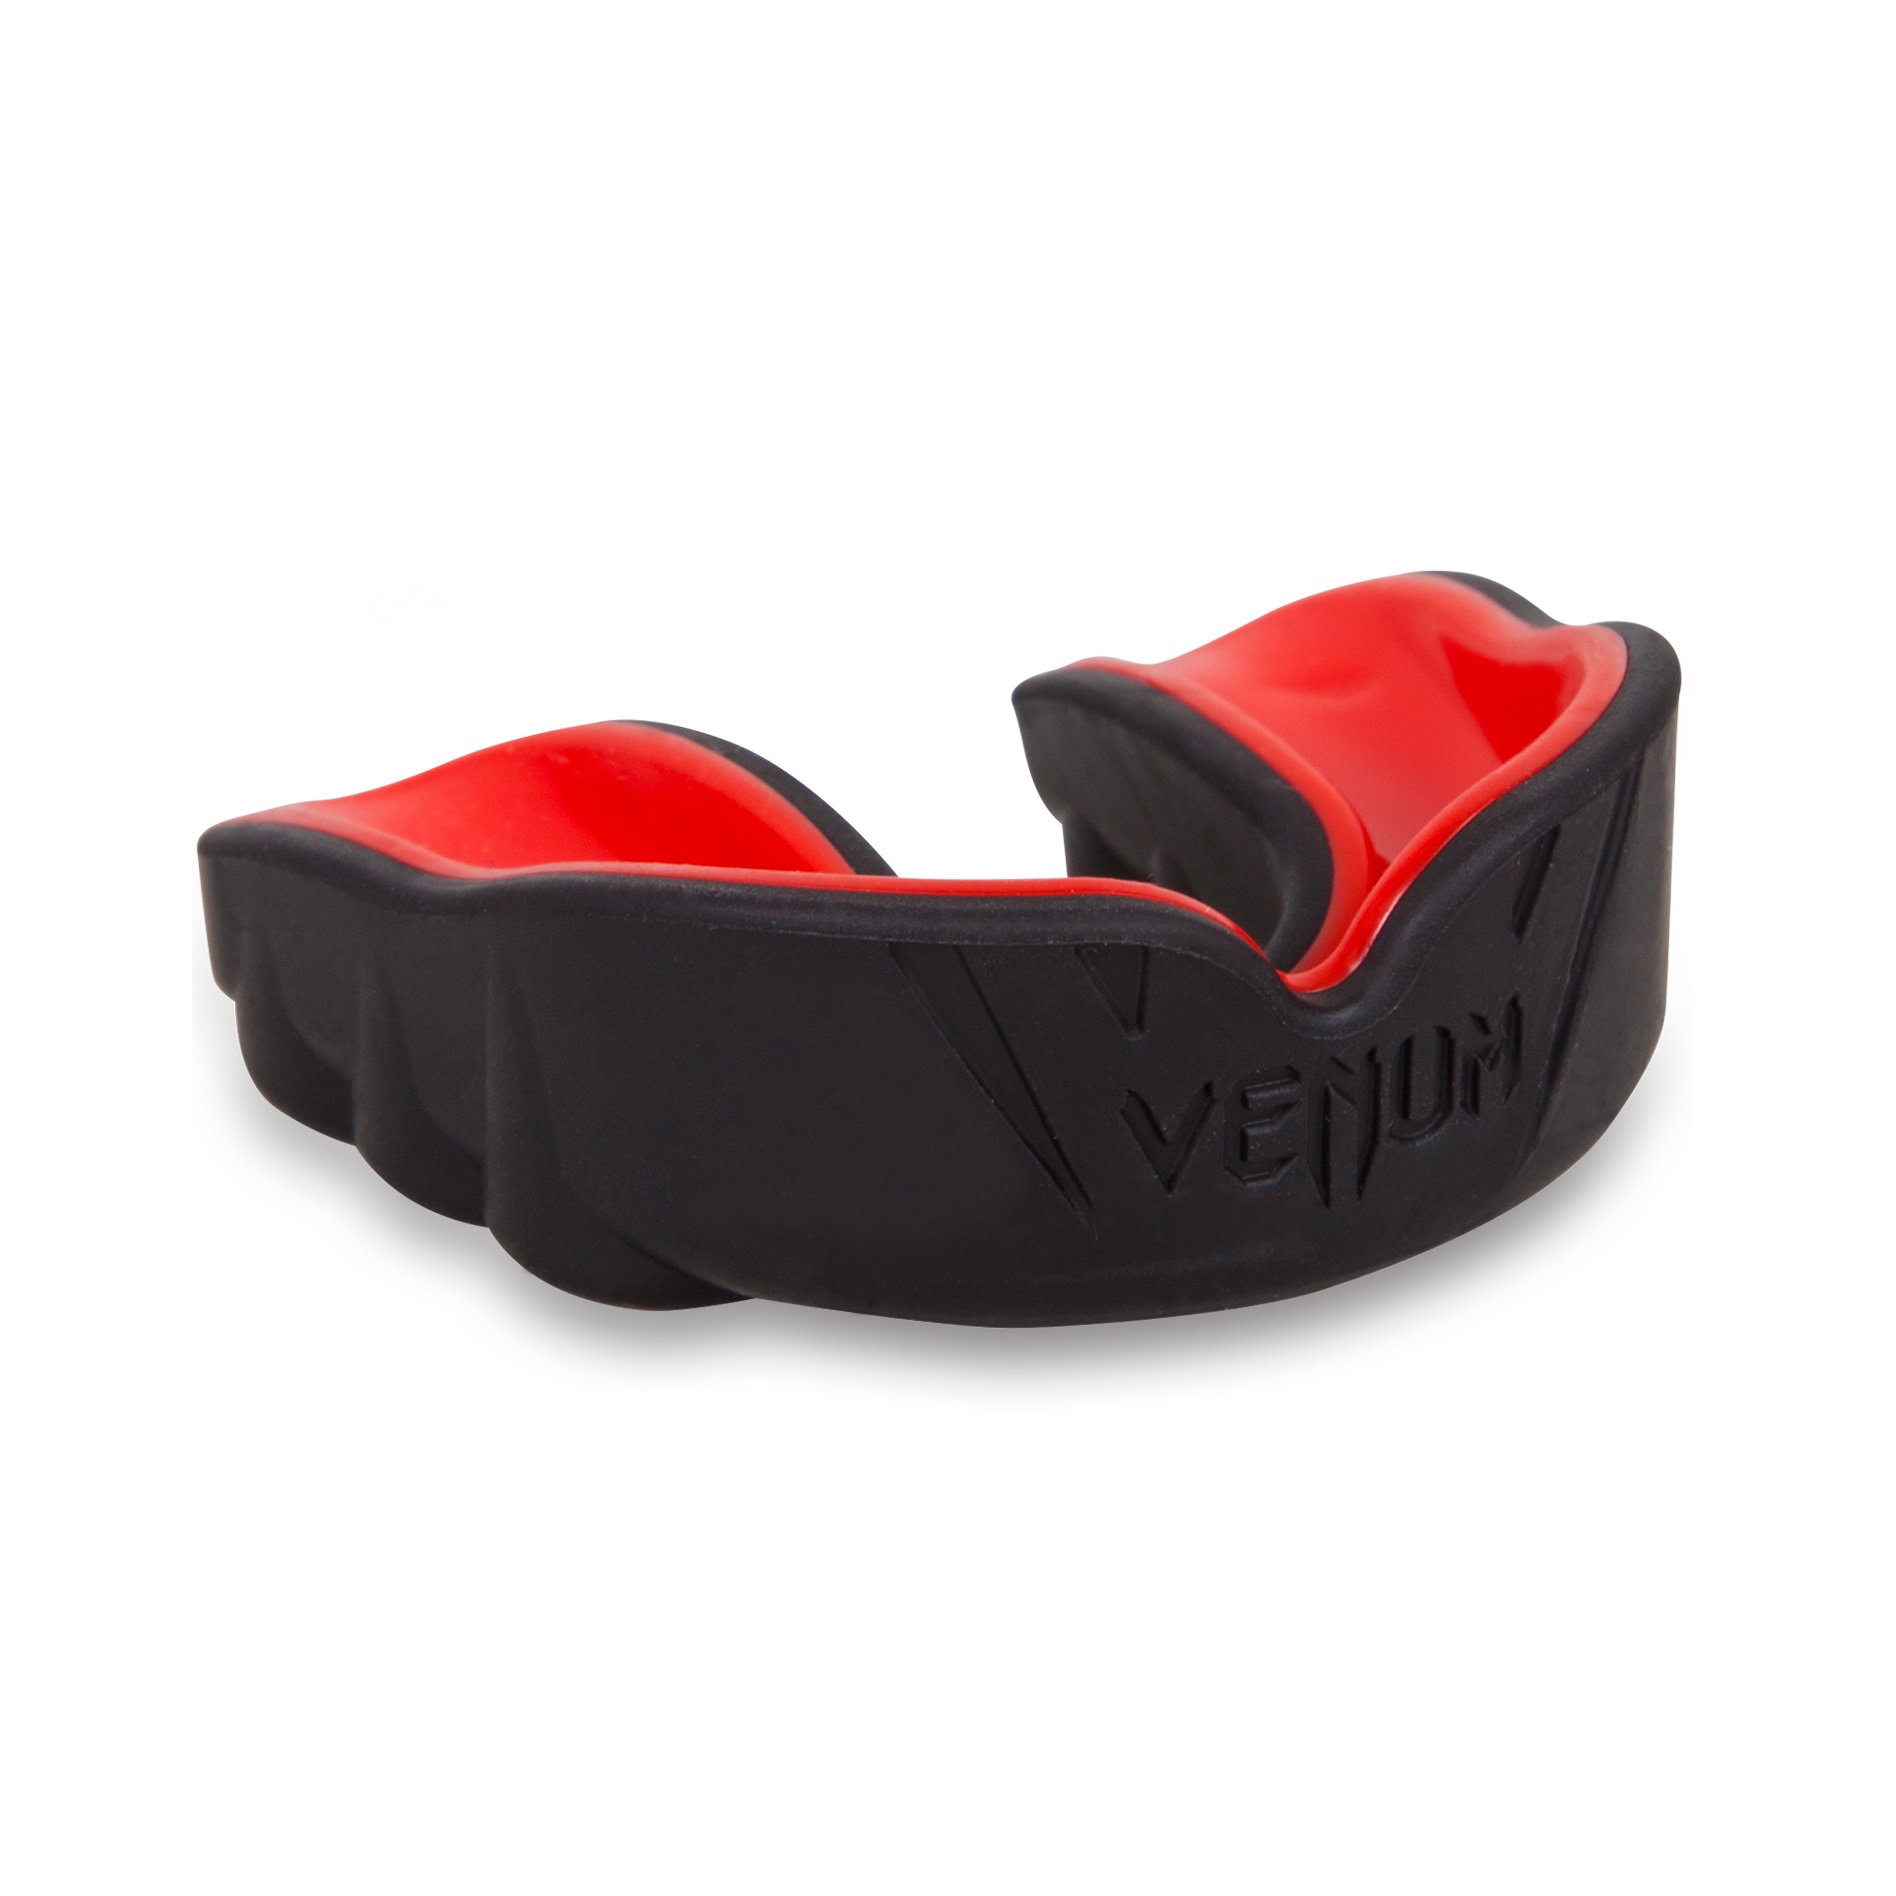 MOUTHGUARD_CHALLENGER_RED_DEVIL_1500_01